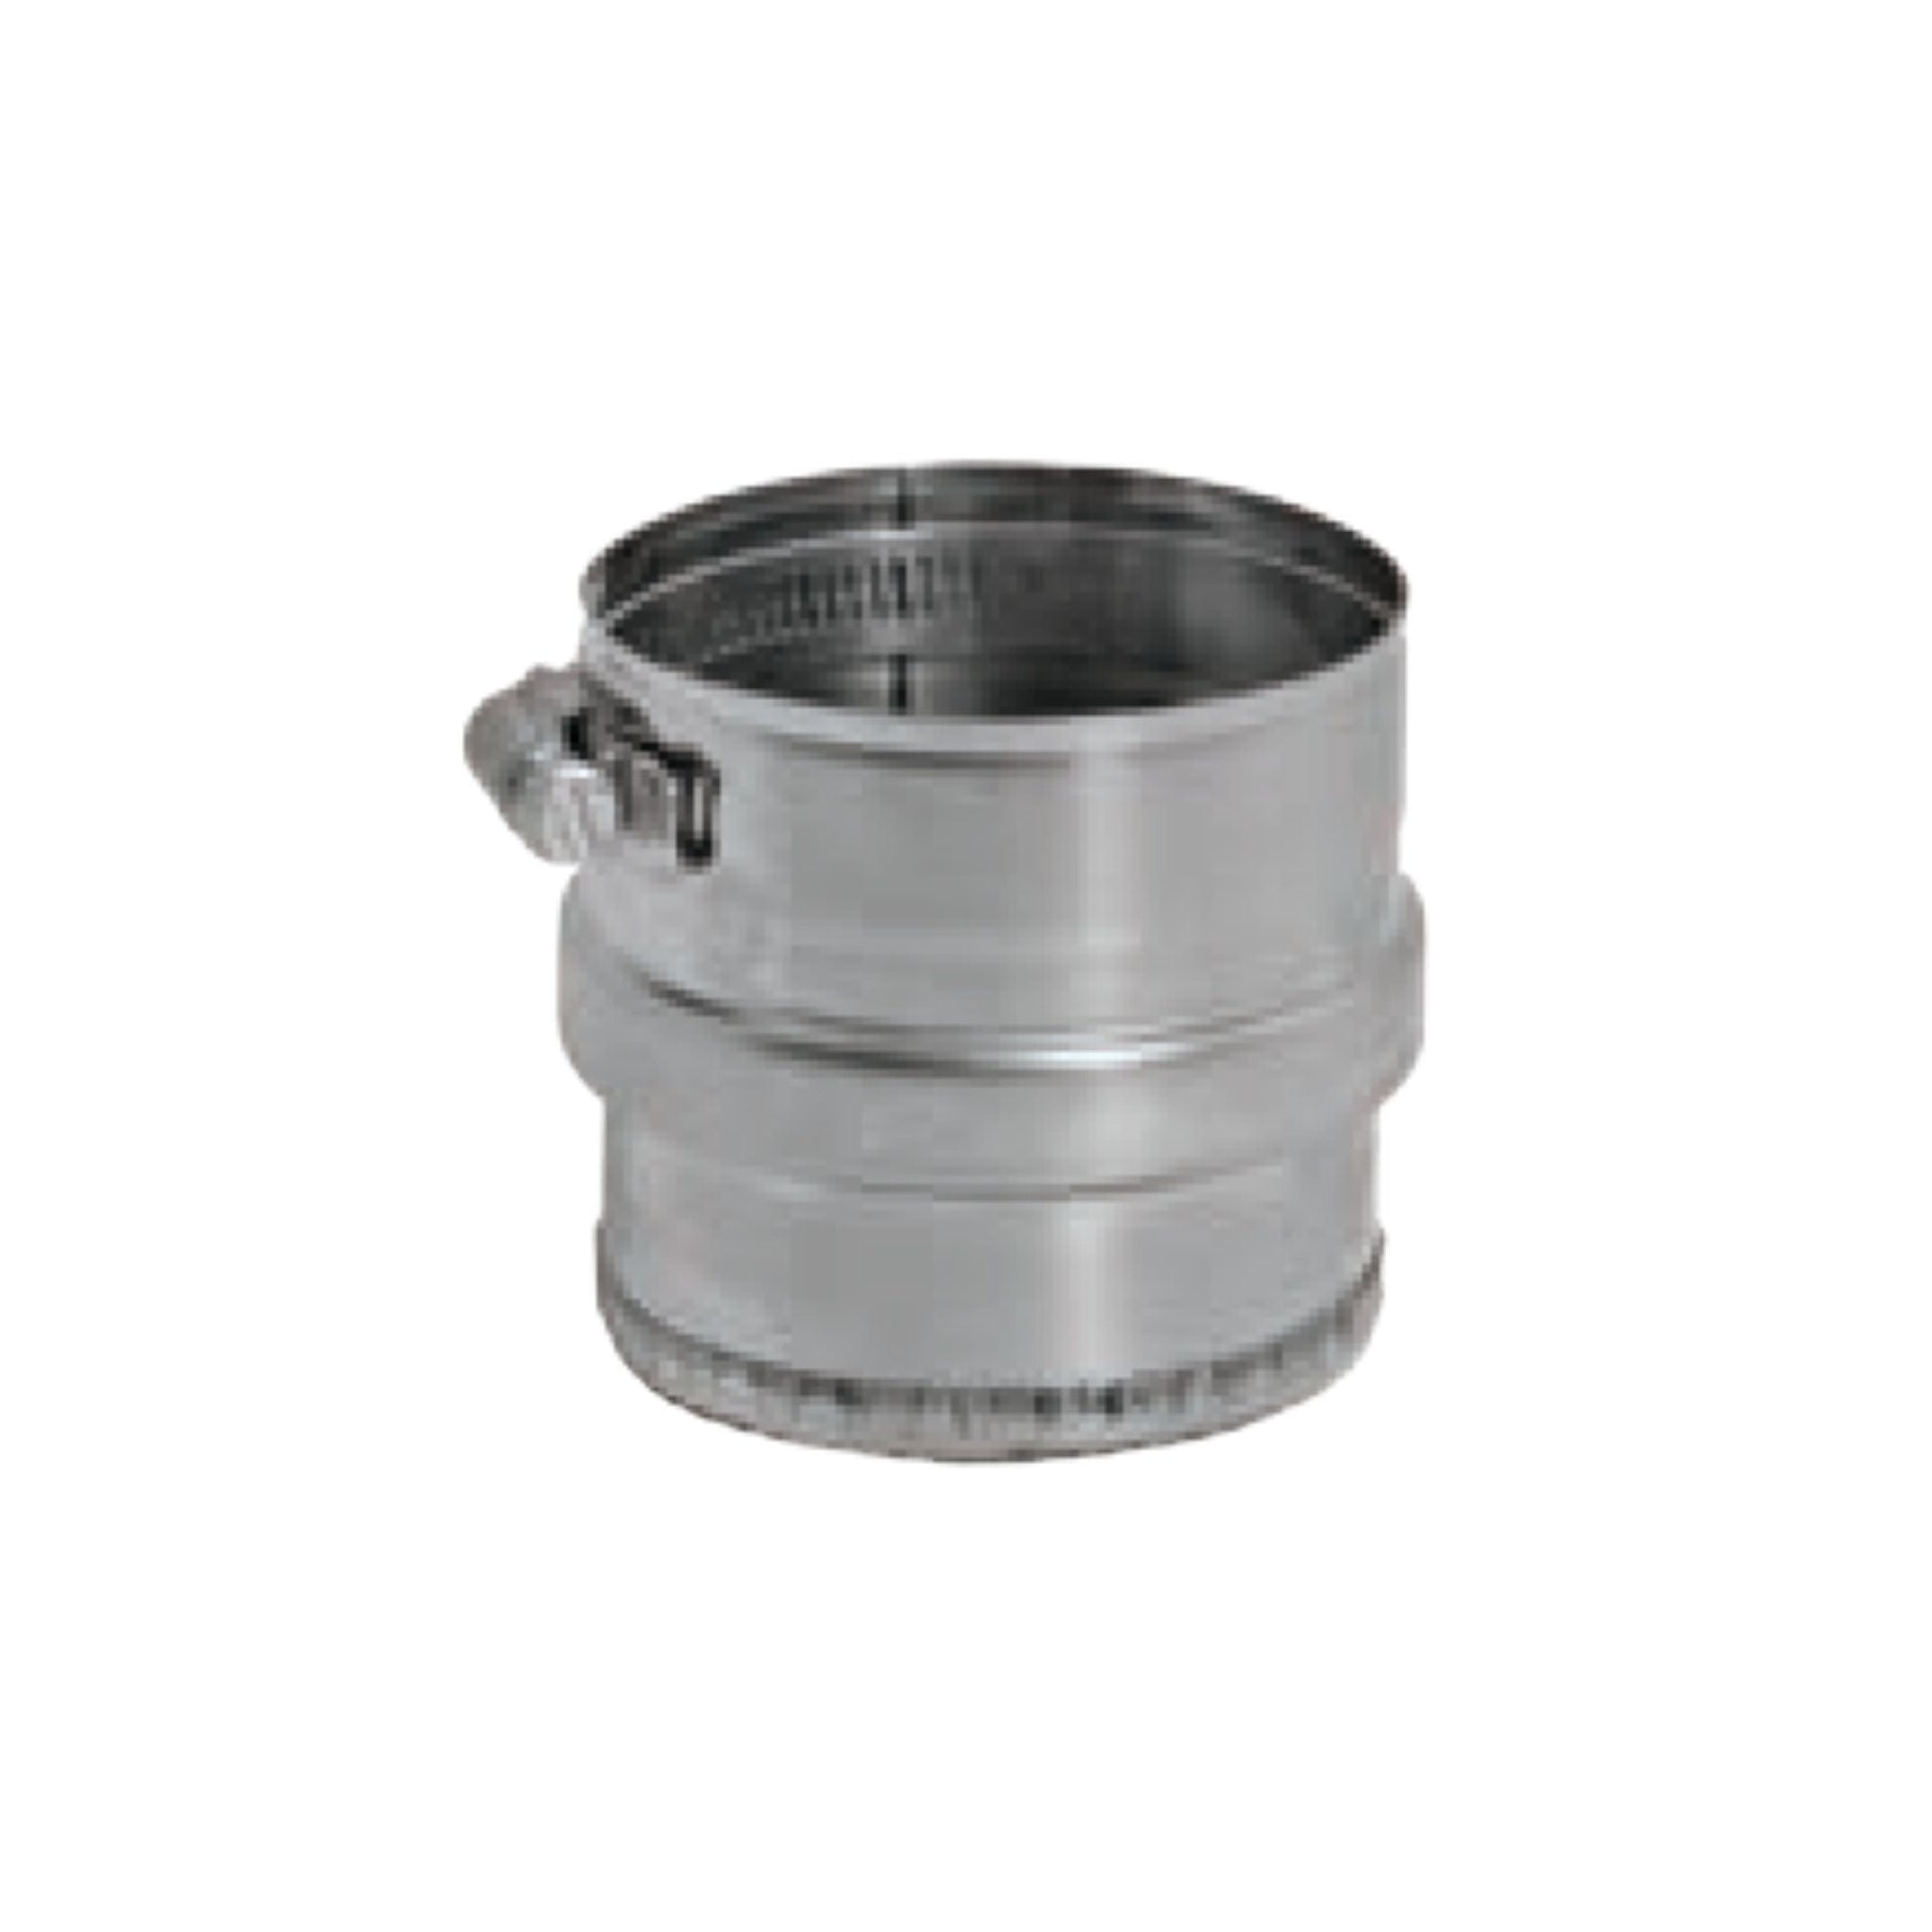 DuraVent FasNSeal 16" 316L Stainless Steel Tee Cap